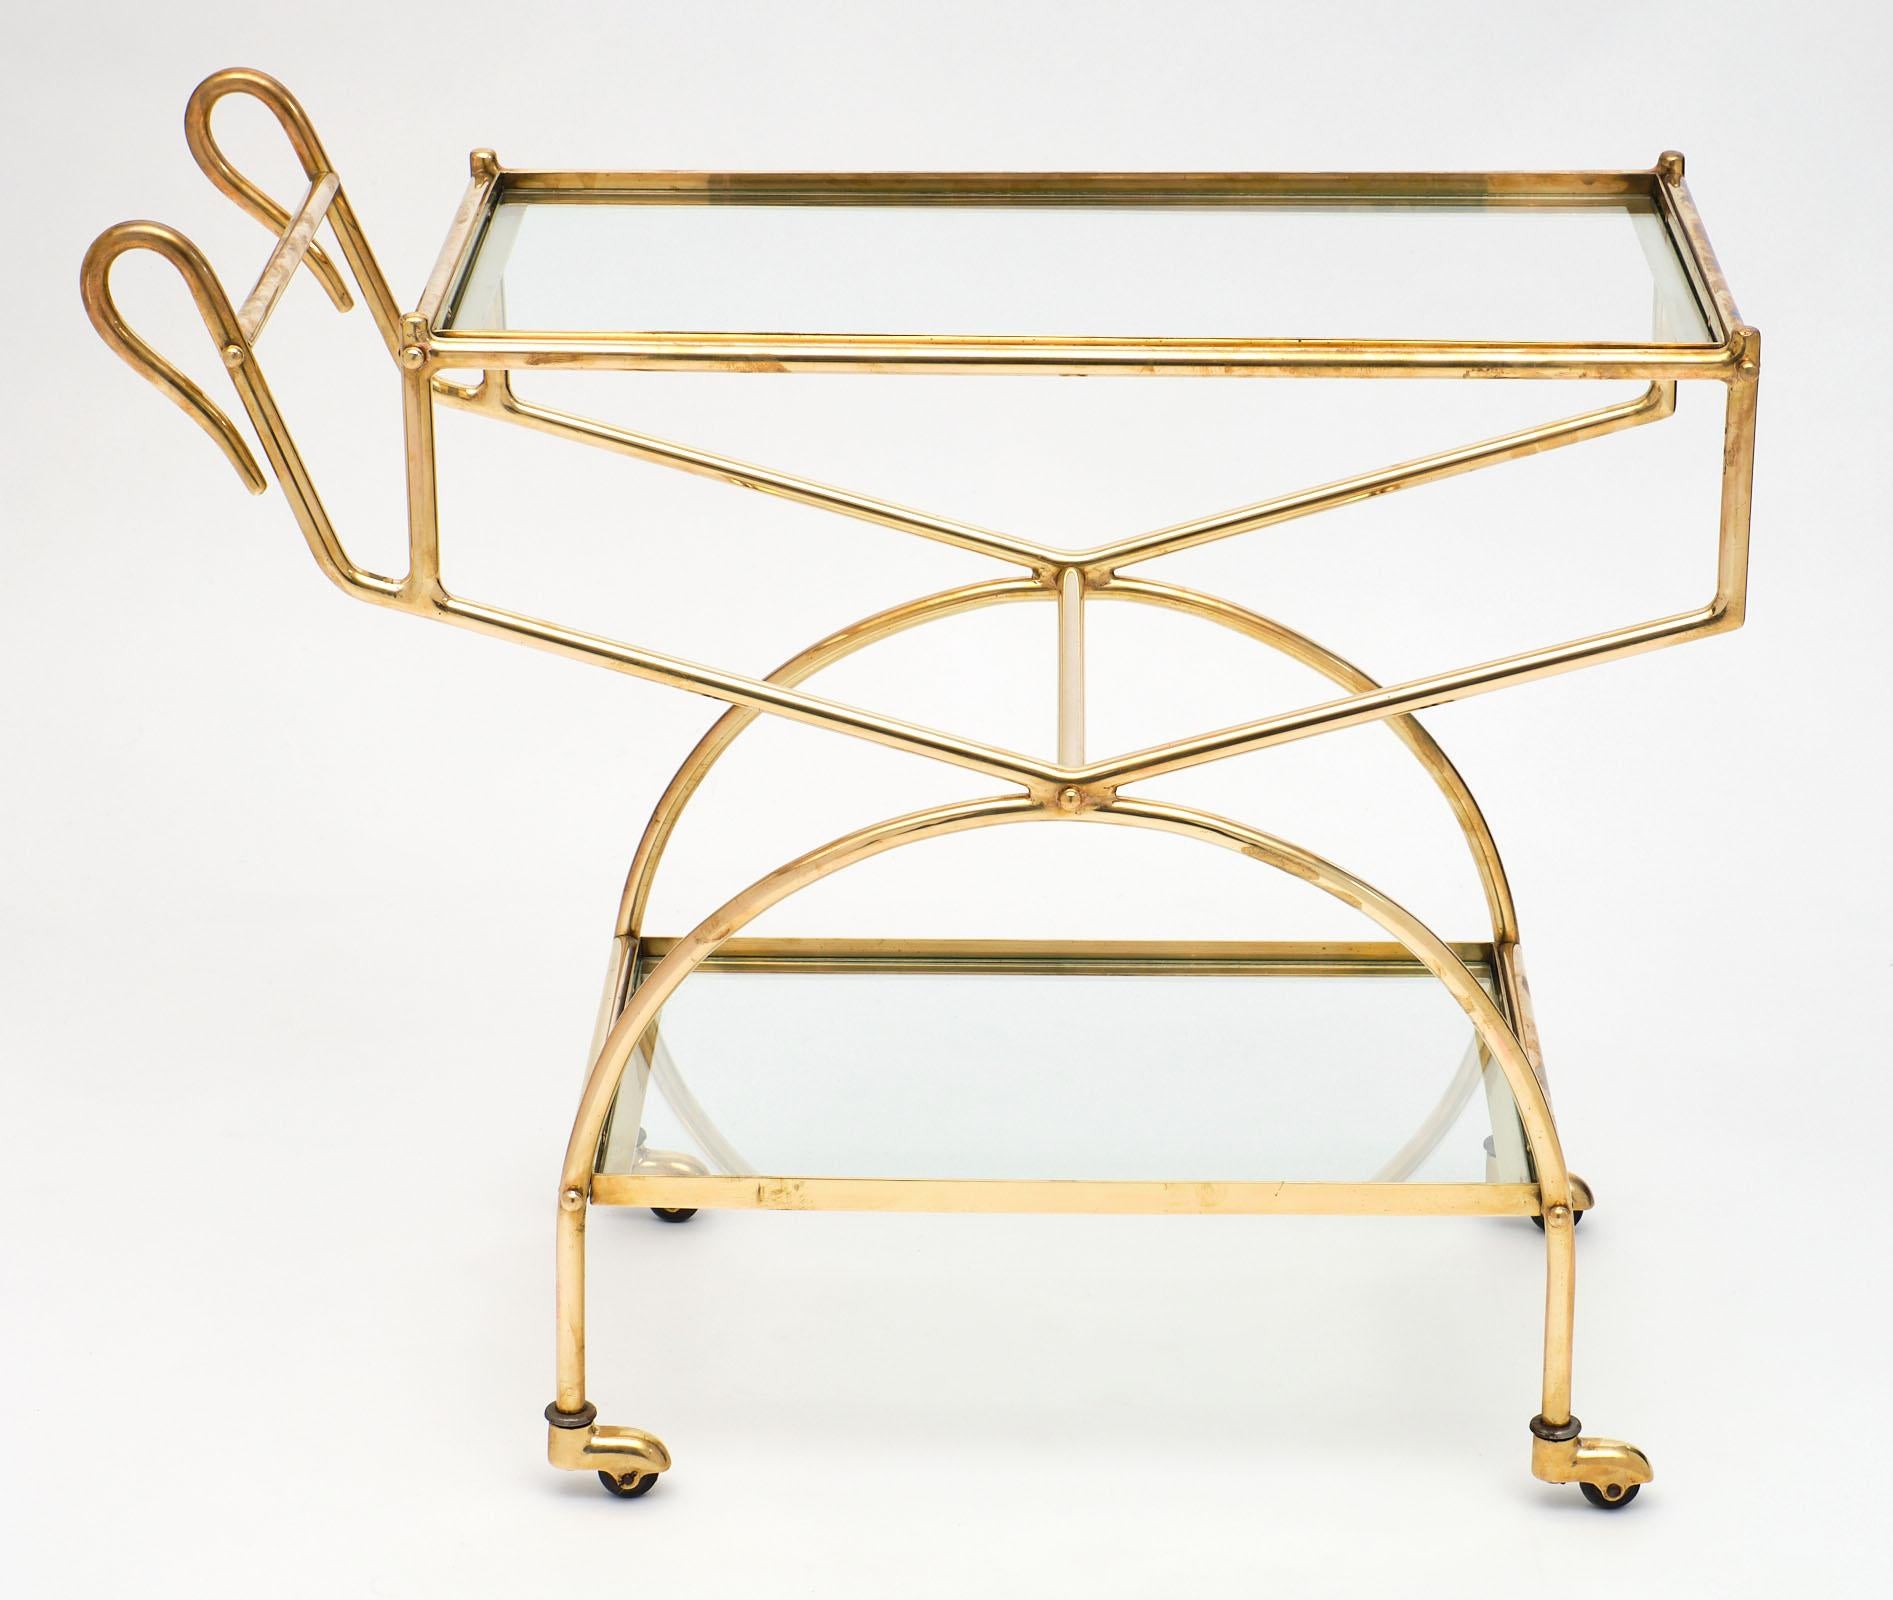 French Maison Baguès brass bar cart with two levels of clear glass. The gilded brass is in impeccable condition with beautiful curved stylized swan-neck handles.